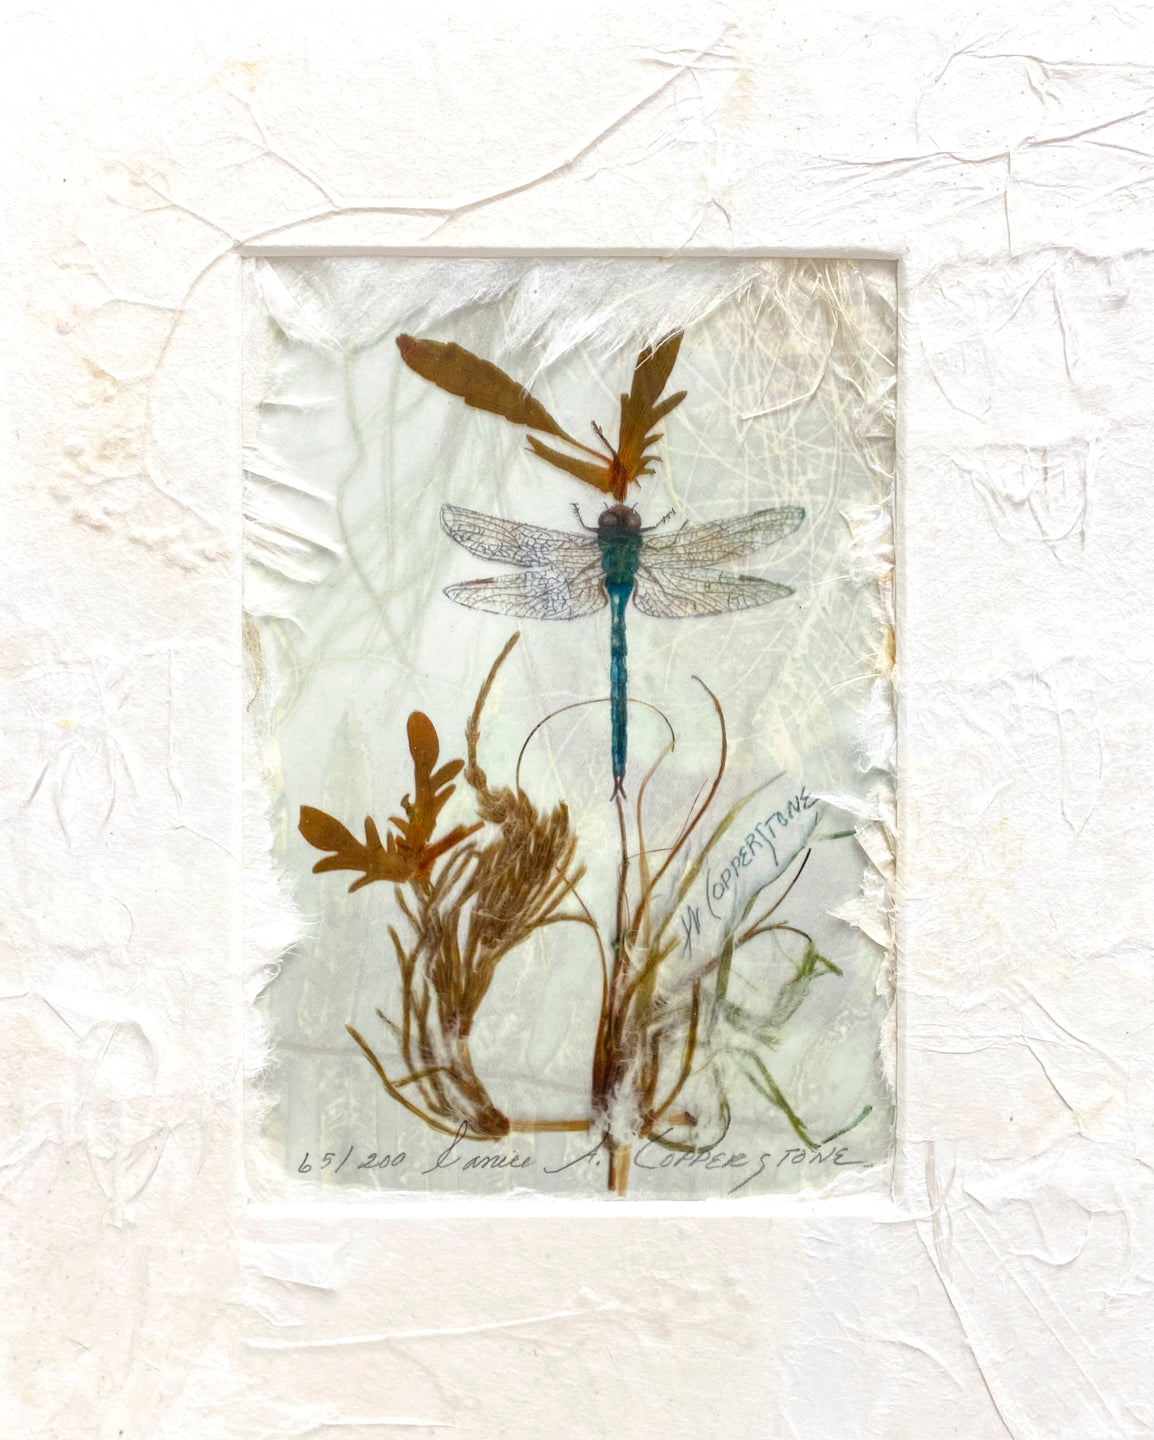 Dragonfly blank greeting card by Janice A. Copperstone of Milford, Mich.  Each card features a watercolor reproduction printed on transparency with a handmade paper background and border. 